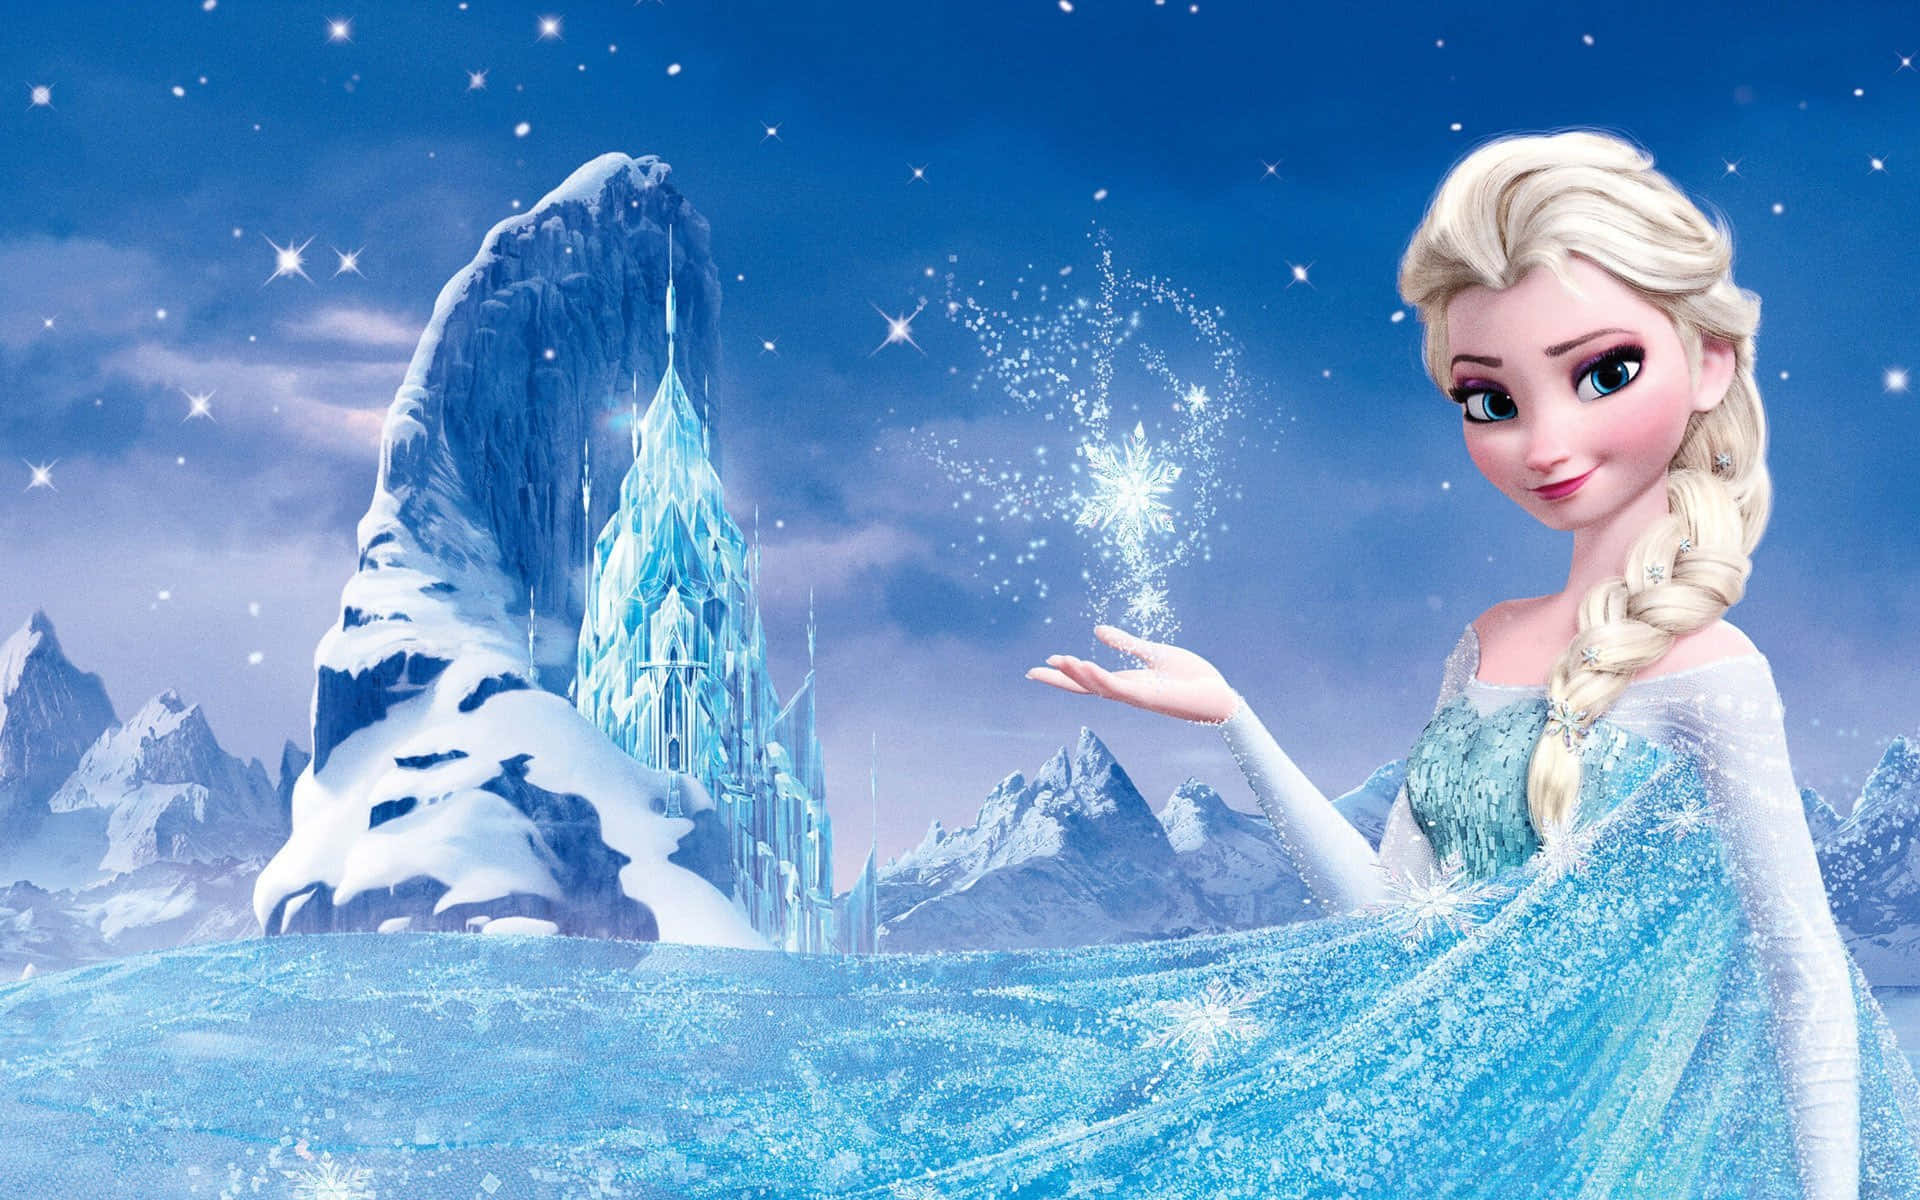 Elsa, the fearless Ice Queen